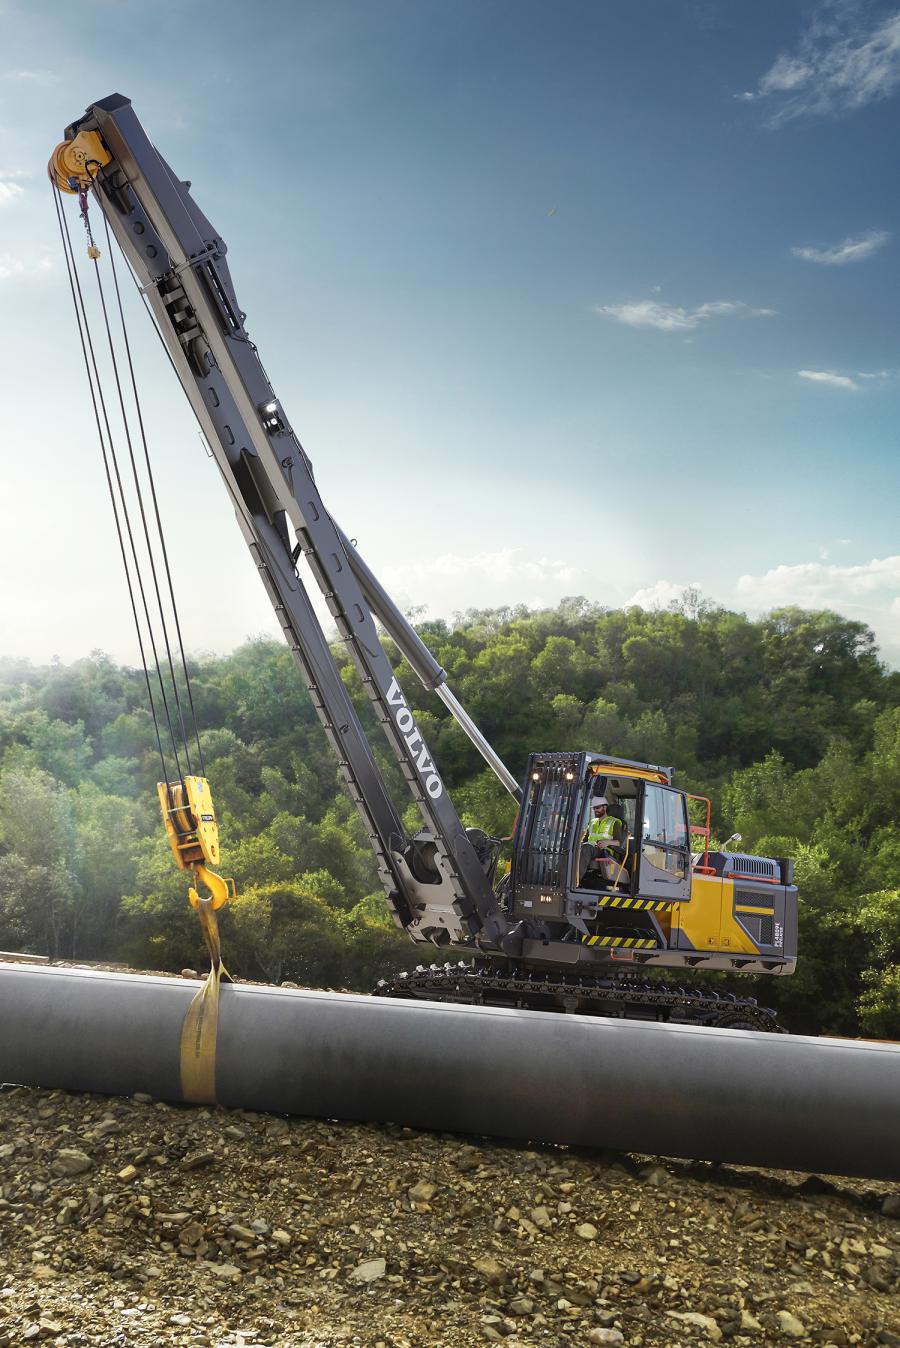 Equipped with the latest Volvo D13J Tier 4 Final engine, the PL4809E delivers lifting capacity that outperforms the largest traditional side booms in its size class.